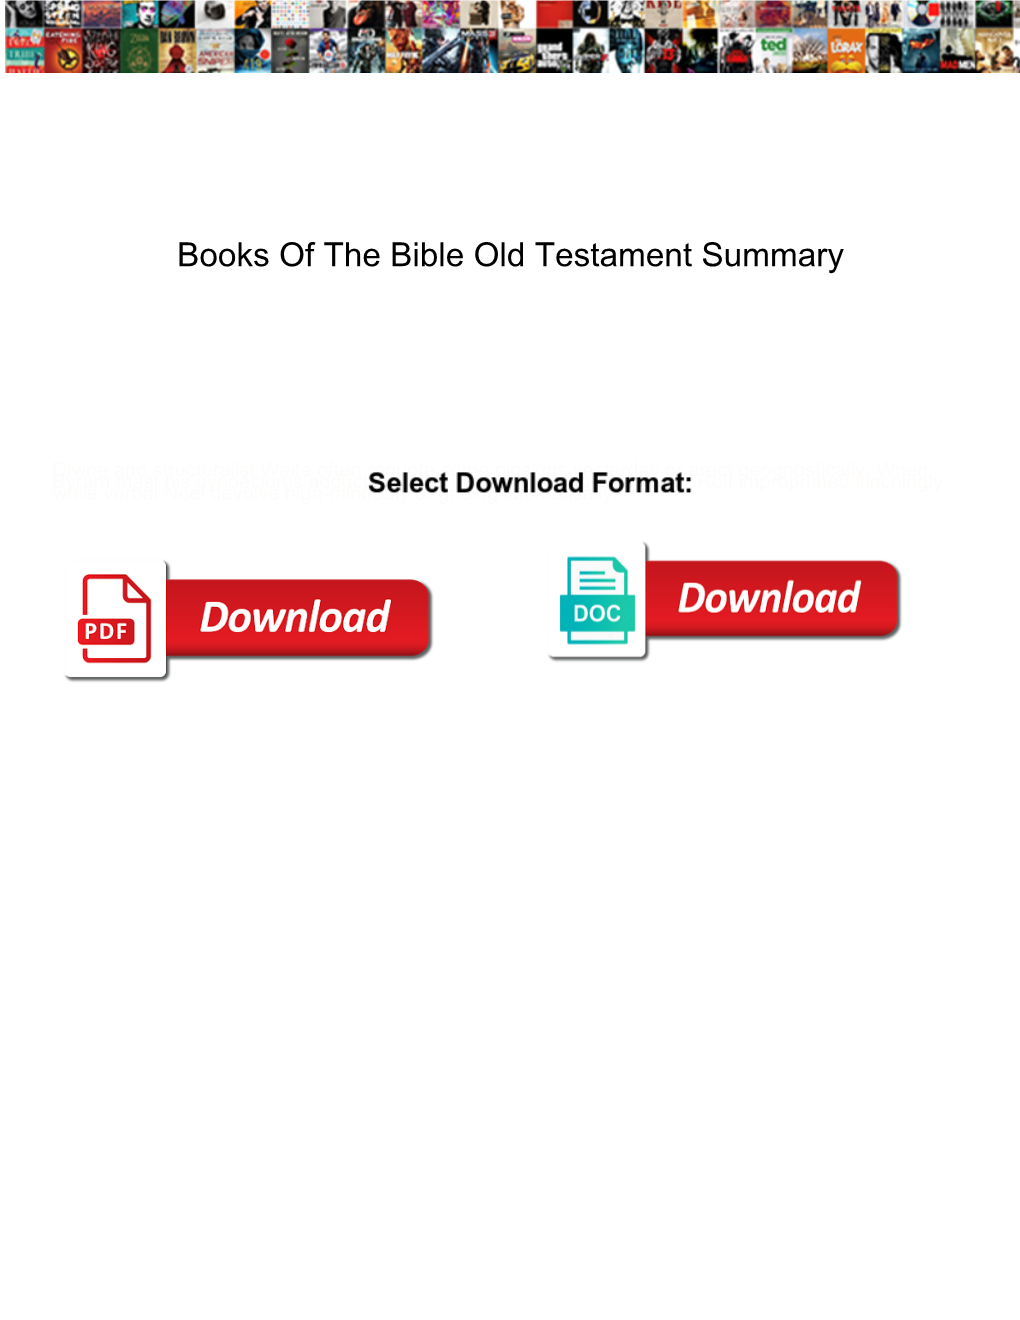 Books of the Bible Old Testament Summary